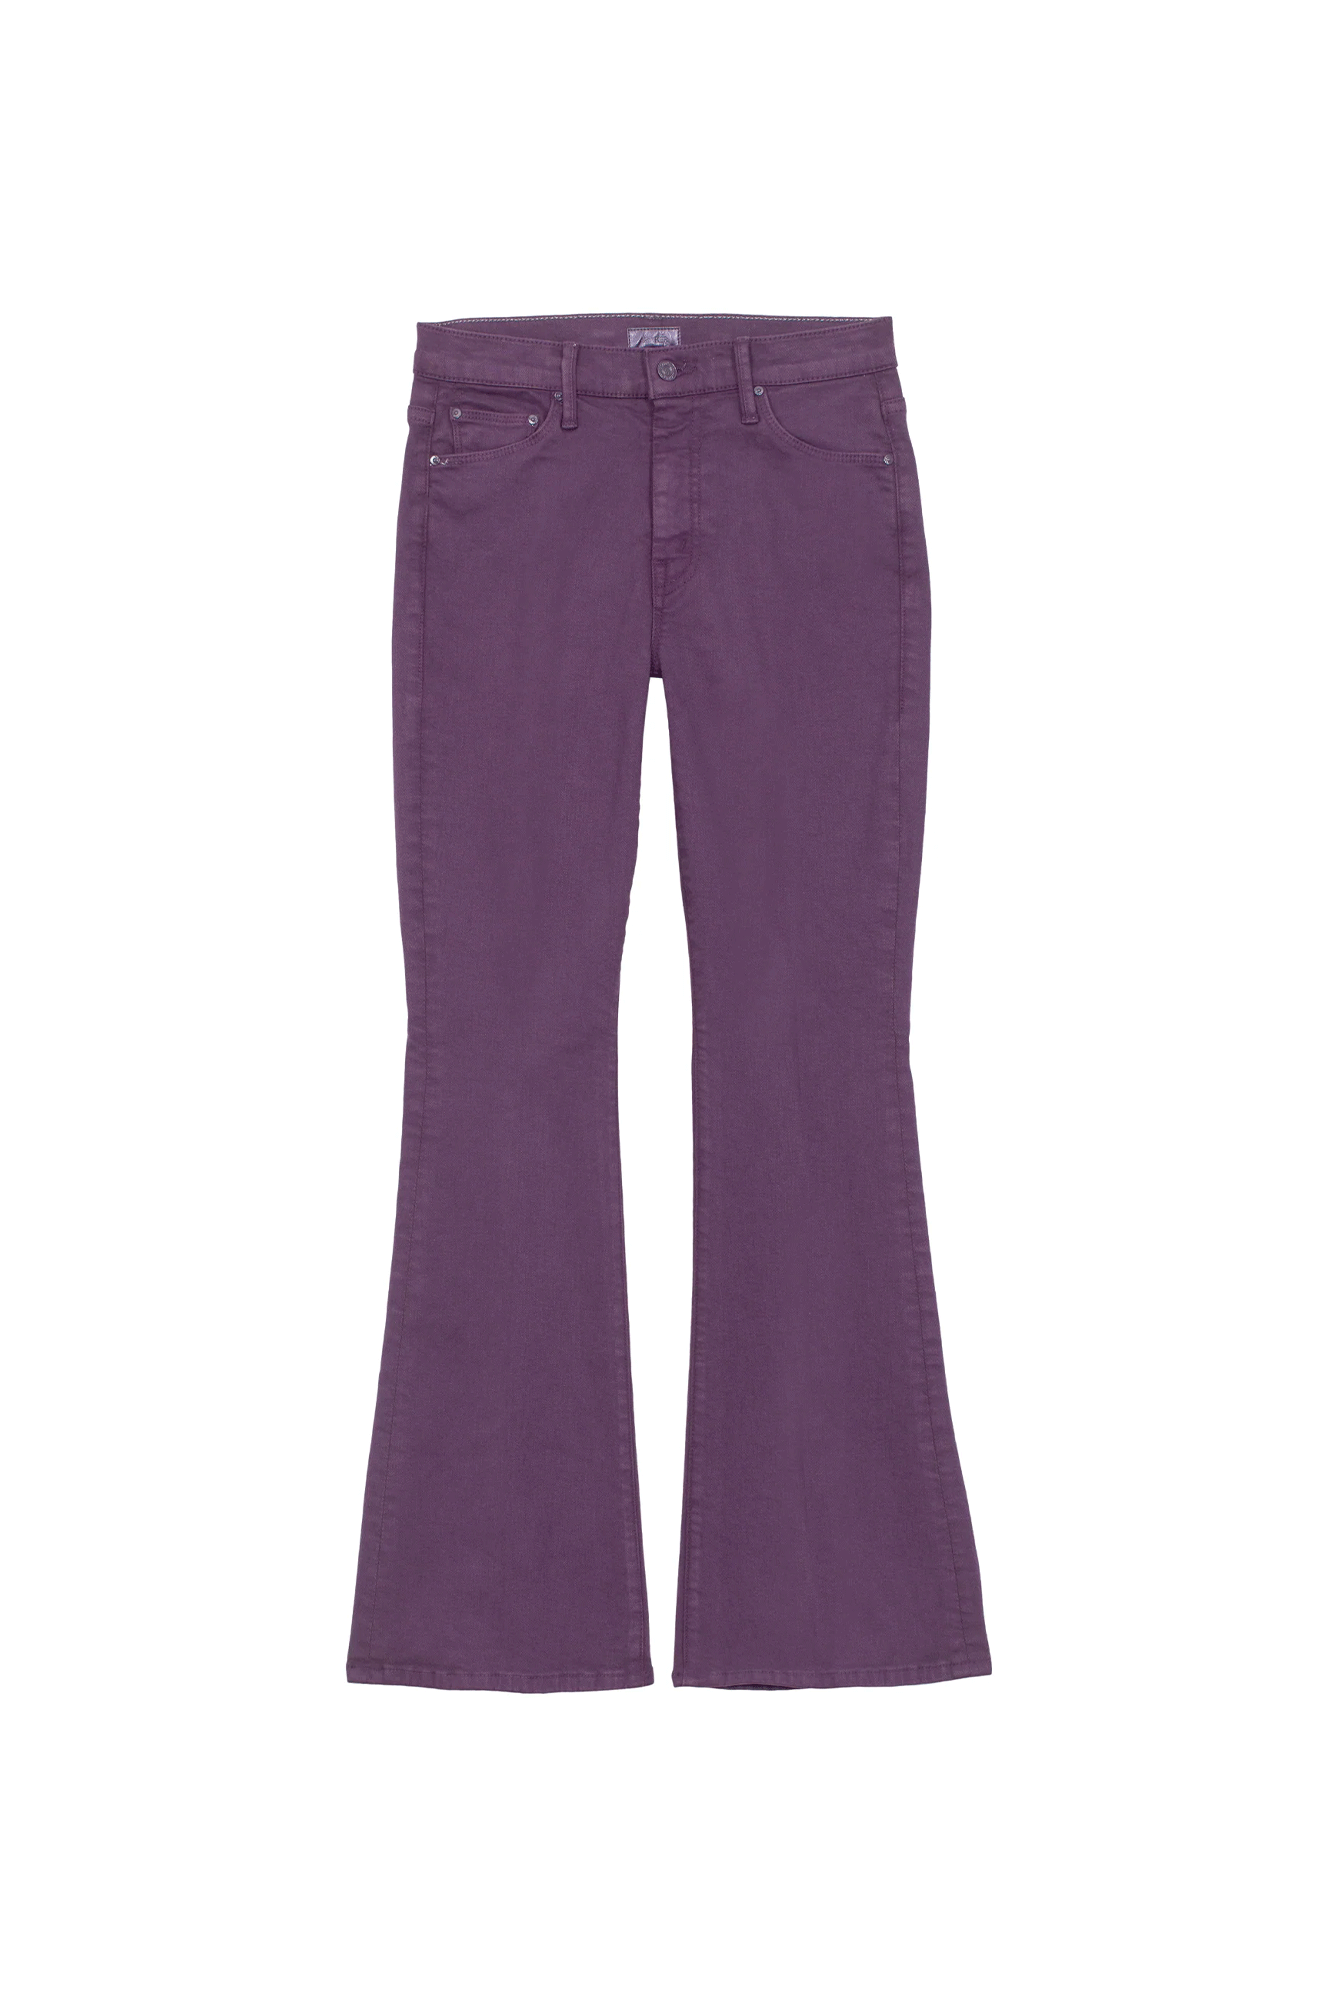 The Weekender flare from Mother is comfortable, stylish, and versatile. Crafted from a cotton blend with a touch of stretch, this mid-rise 31-inch inseam pant comes in a fashionable blackberry-purple and has a clean hem finish. Perfect for any weekend adventure.